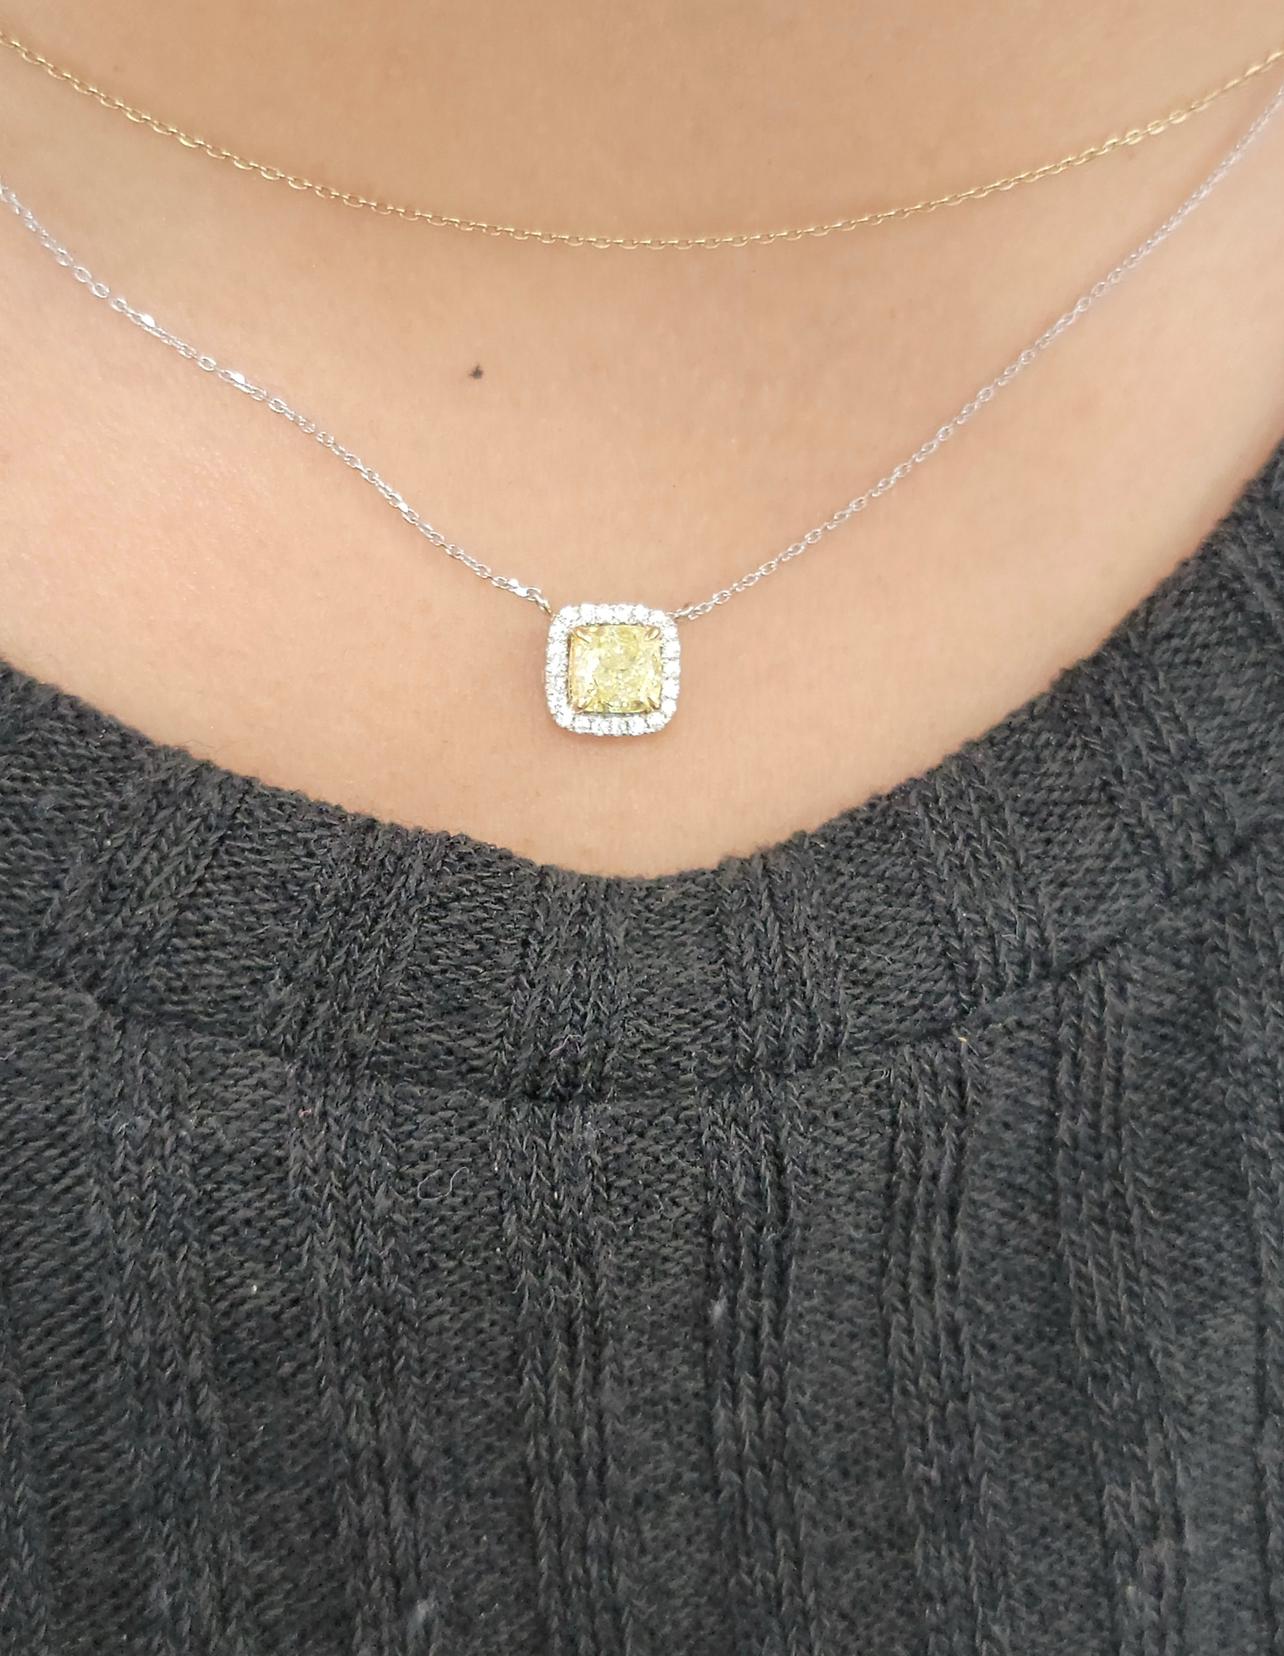 Beautiful 18kt White and Yellow Gold pendant with a 1 carat GIA Fancy Light Yellow Cushion set in a delicate halo design 

Thin classic chain 

Making Extraordinary Attainable with Rare Colors
